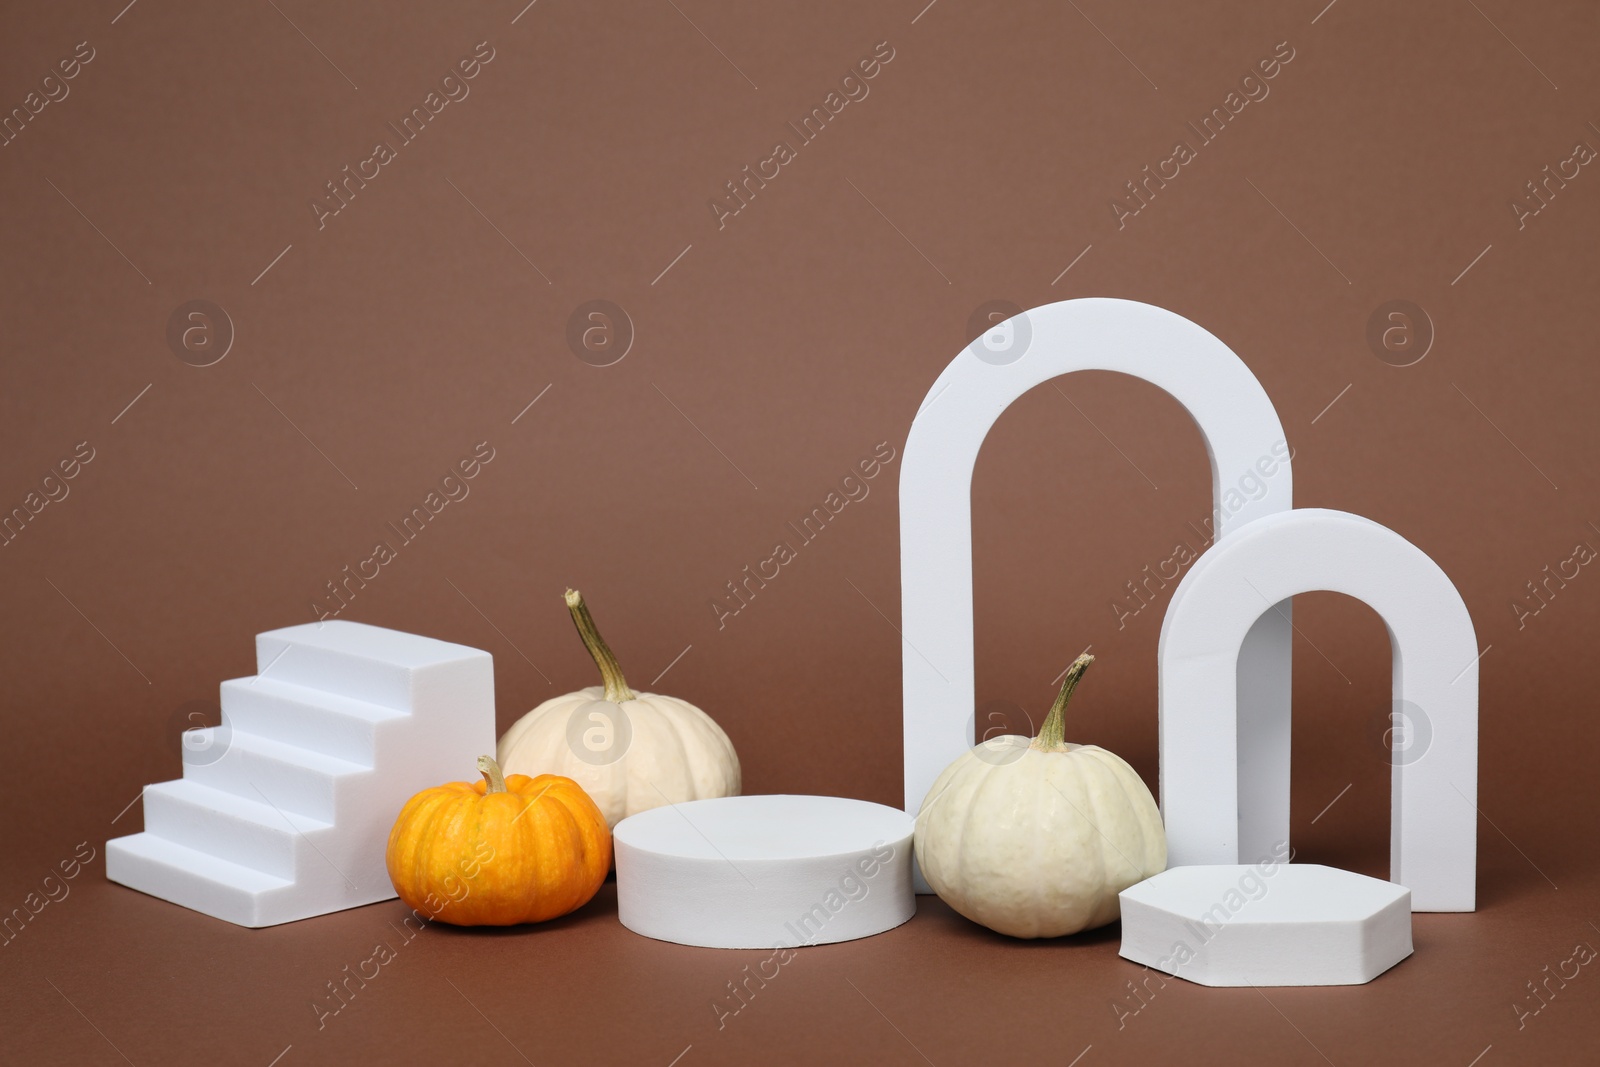 Photo of Autumn presentation for product. White geometric figures and pumpkins on brown background